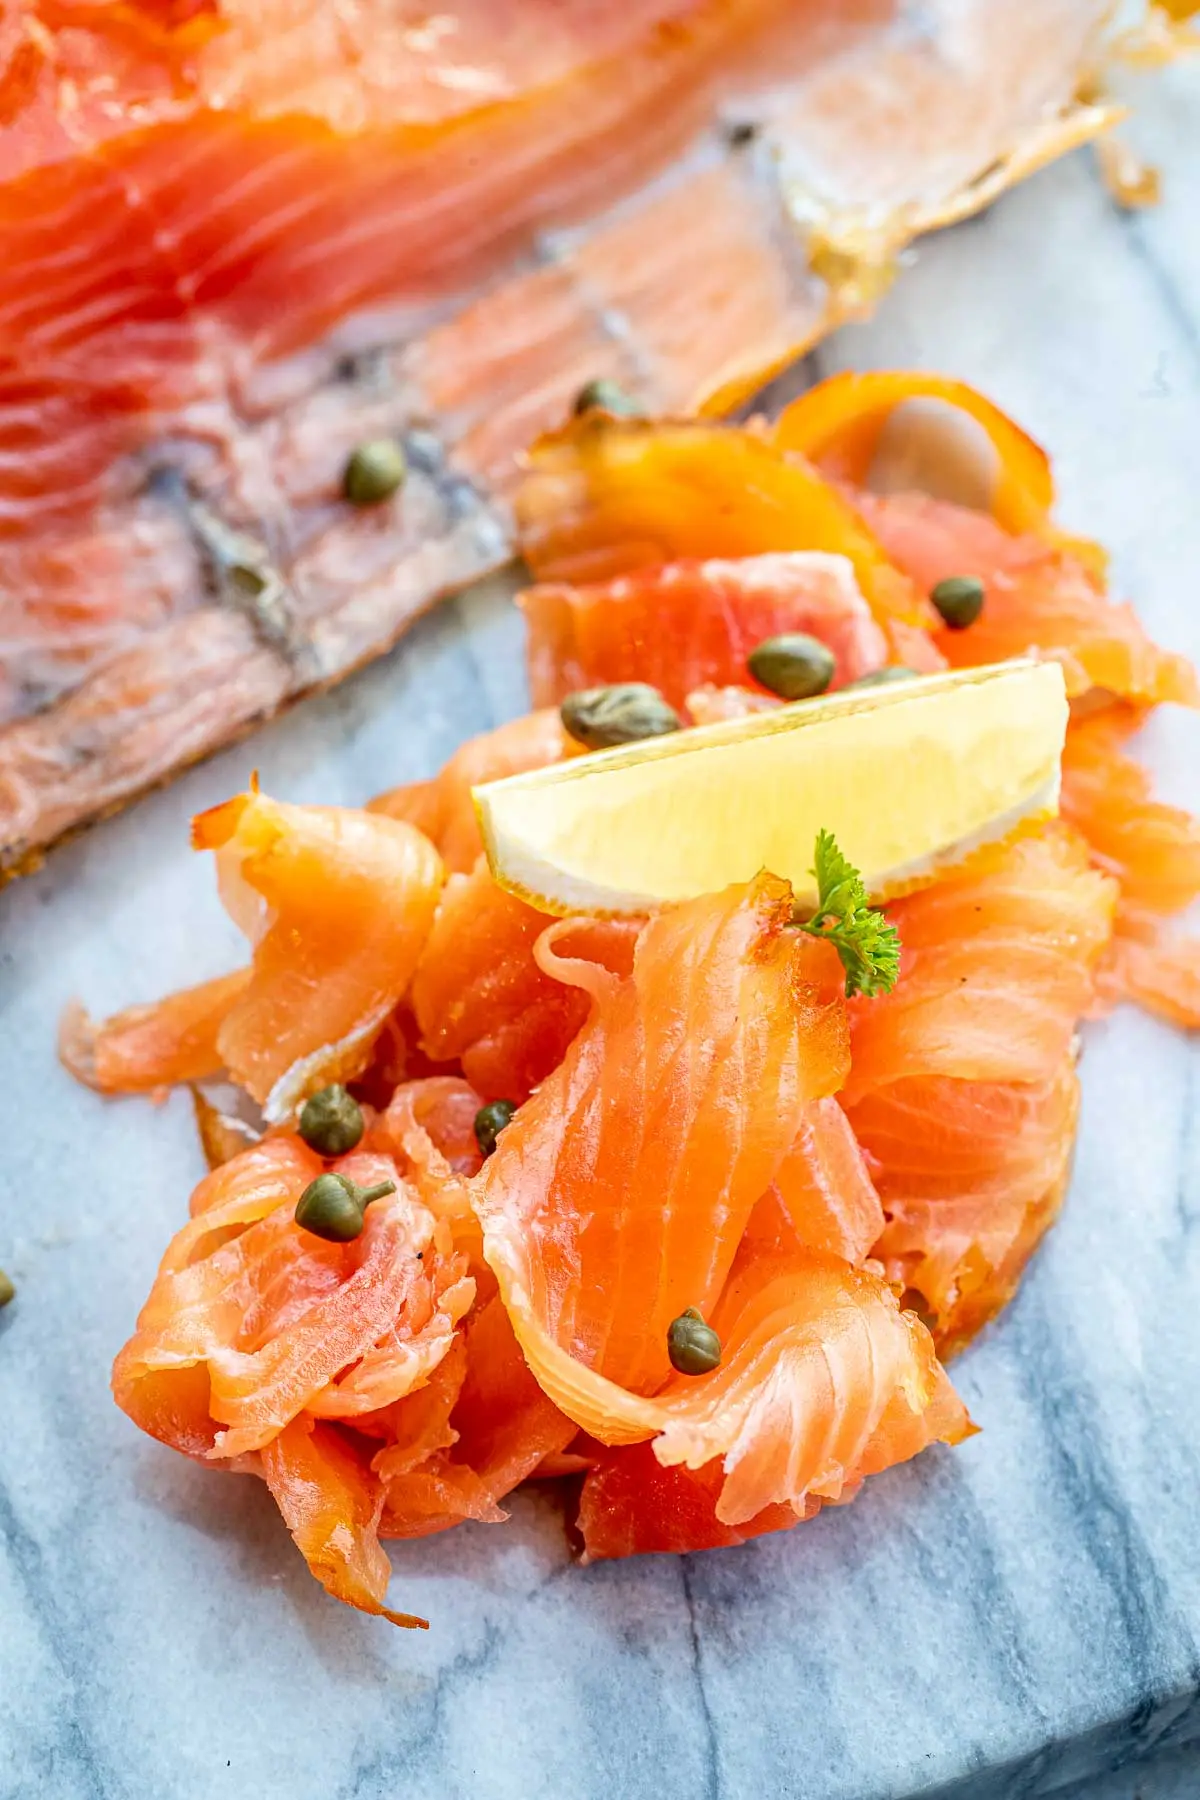 brine for cold smoked salmon - How do you brine fish for cold smoking